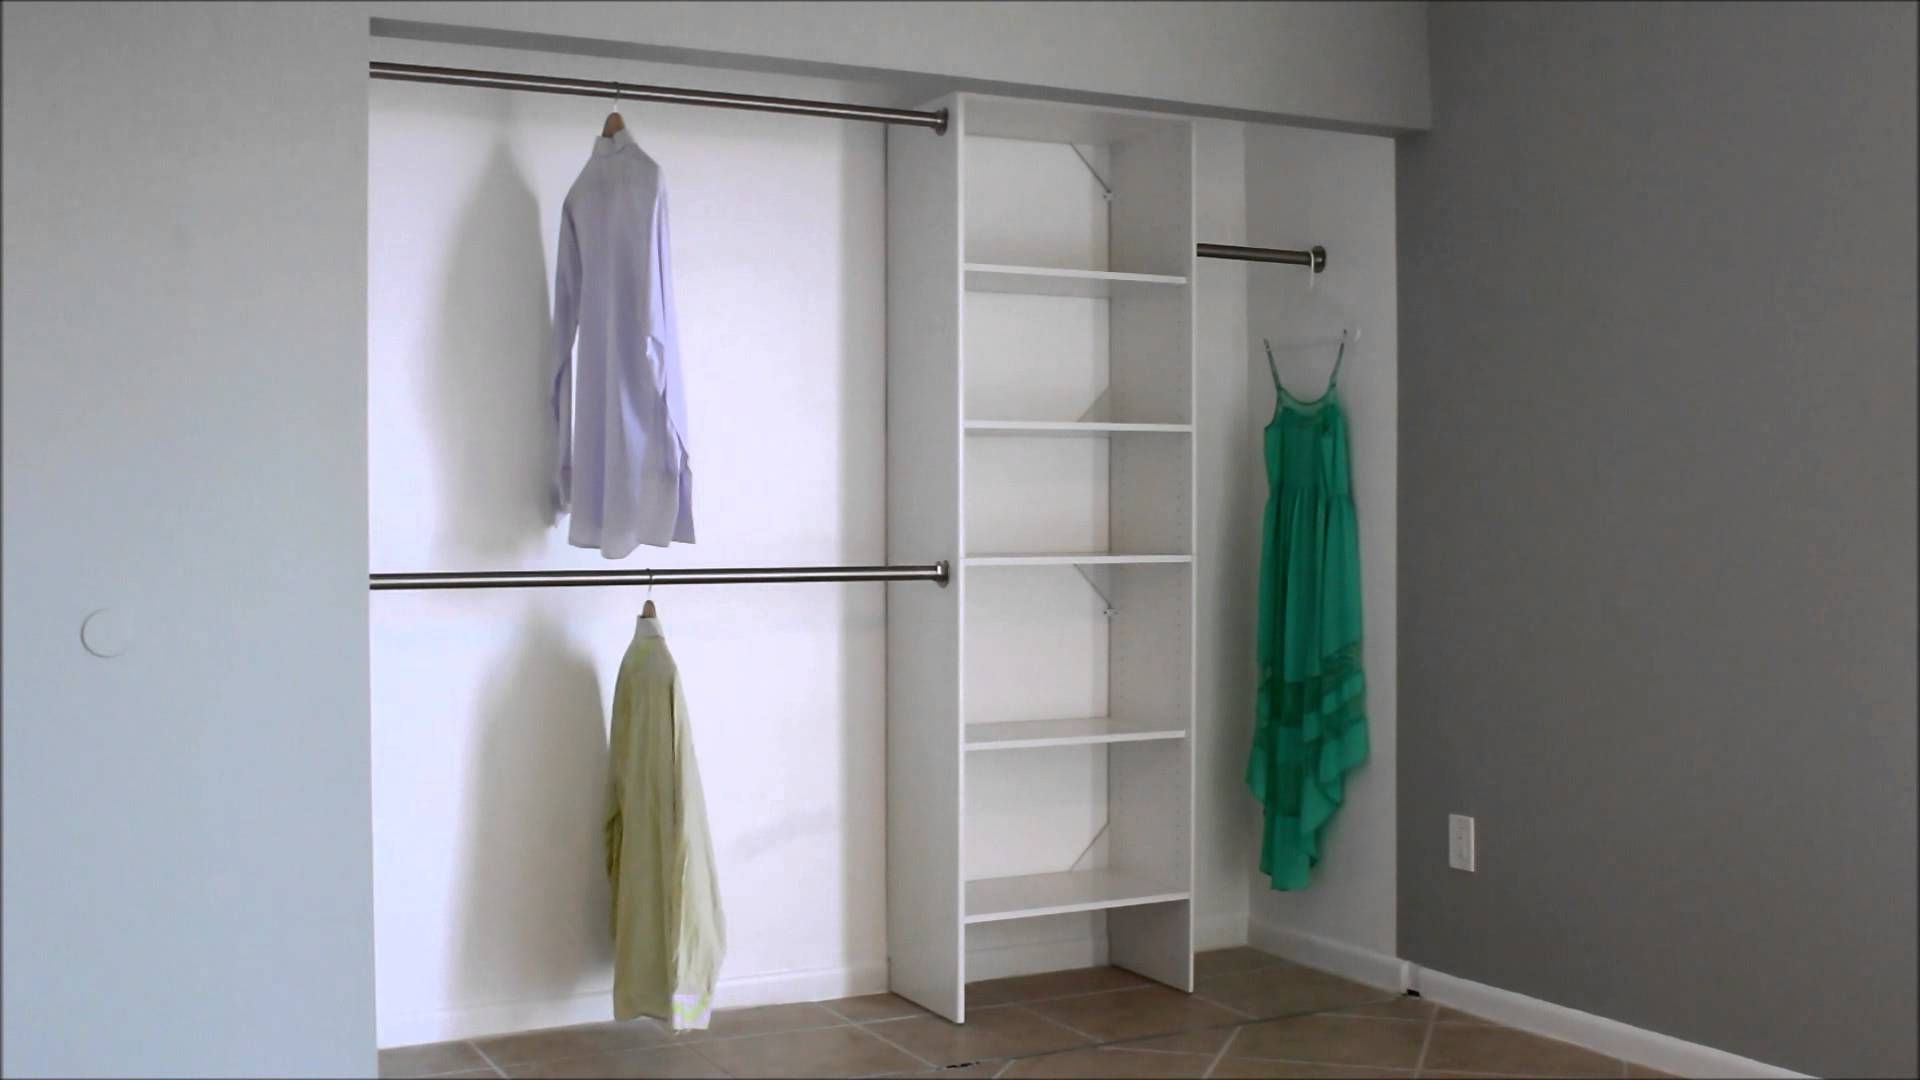 Double Rod Closet Height | Standard Closet Rod Height | Closet Rod Height,  Closet Rod, Closet Bedroom With Tall Double Rail Wardrobes (View 8 of 20)